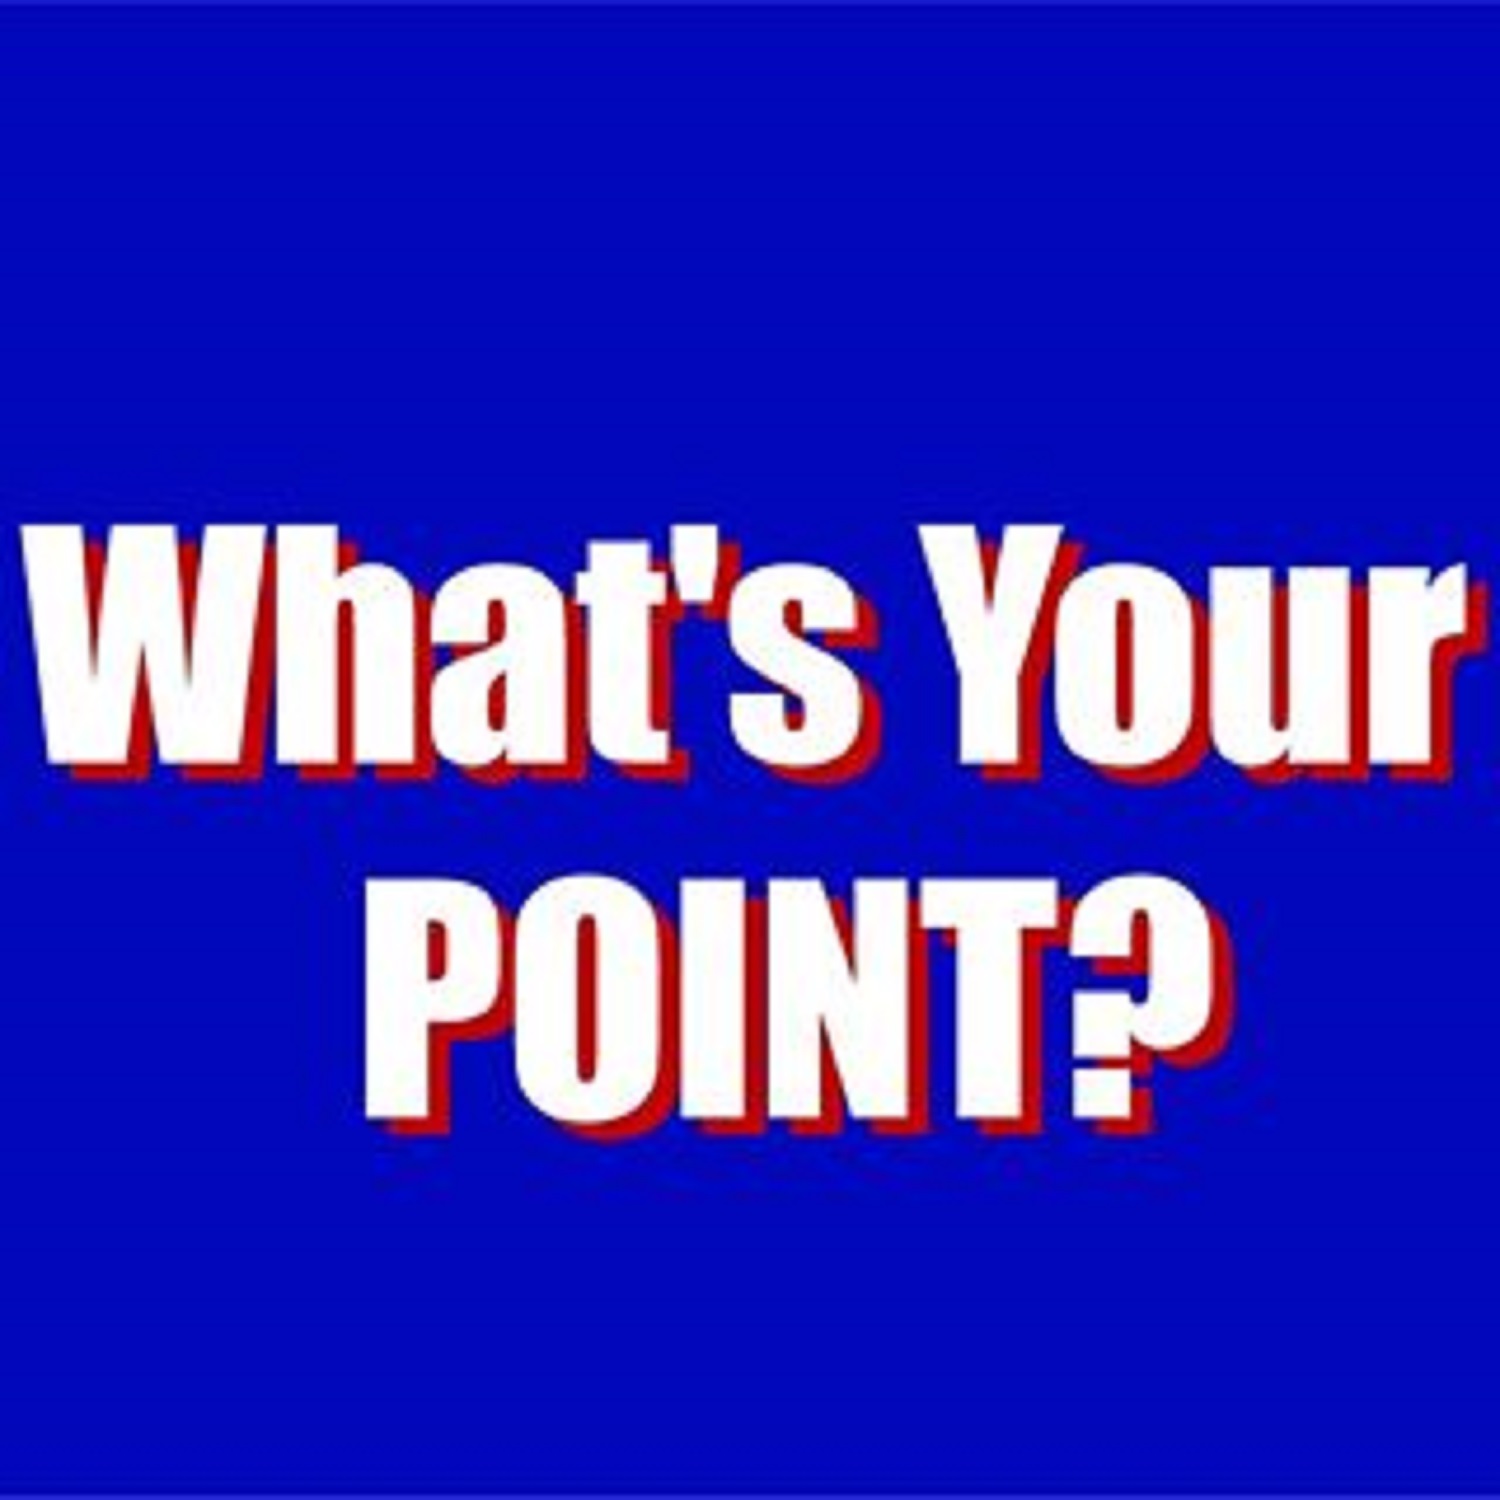 Whats Your Point 10-28-15